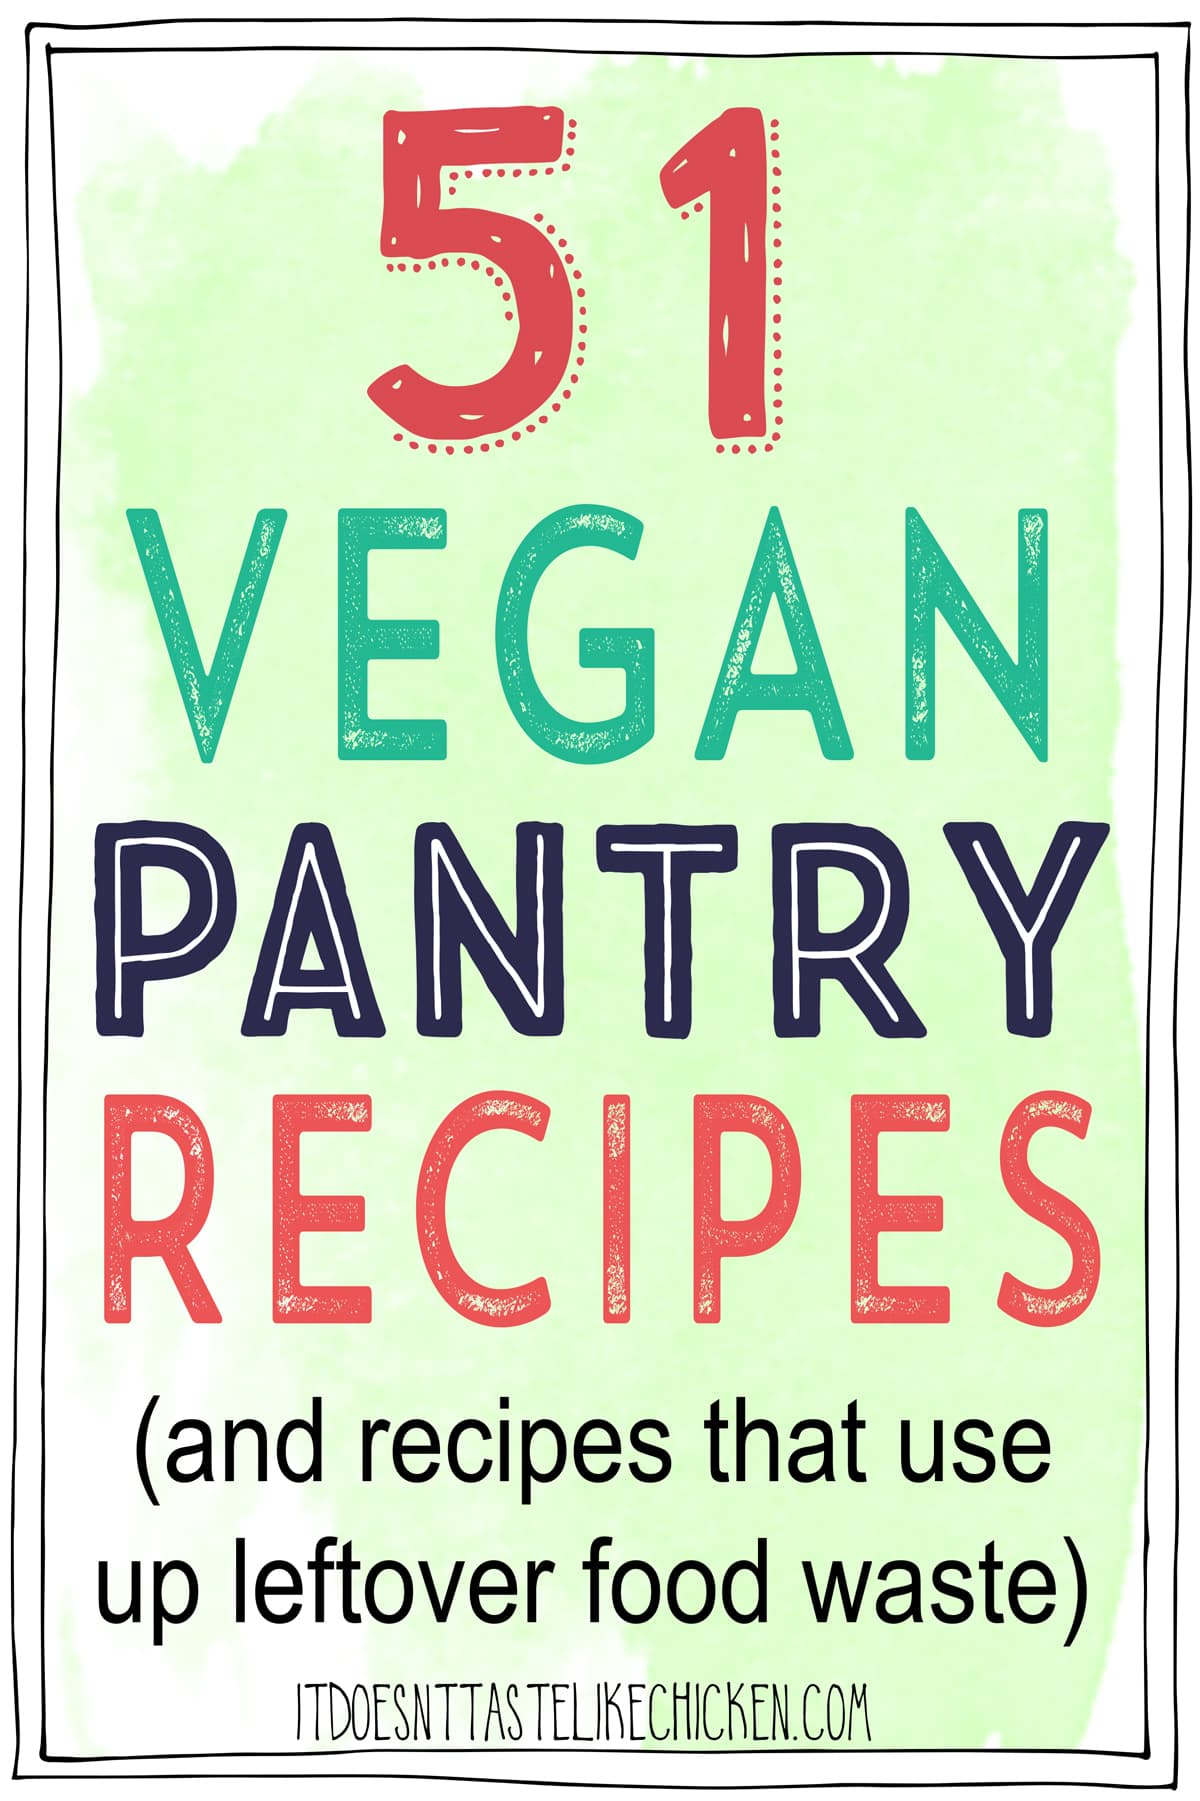 51 Easy Vegan Pantry Recipes (and recipes that use up leftover food waste). No need to make a trip to the grocery store, stay home and make these recipes. Everything from breakfast, snacks, lunch, dinner, and desserts! #itdoesnttastelikechicken #veganrecipes #socialdistancing